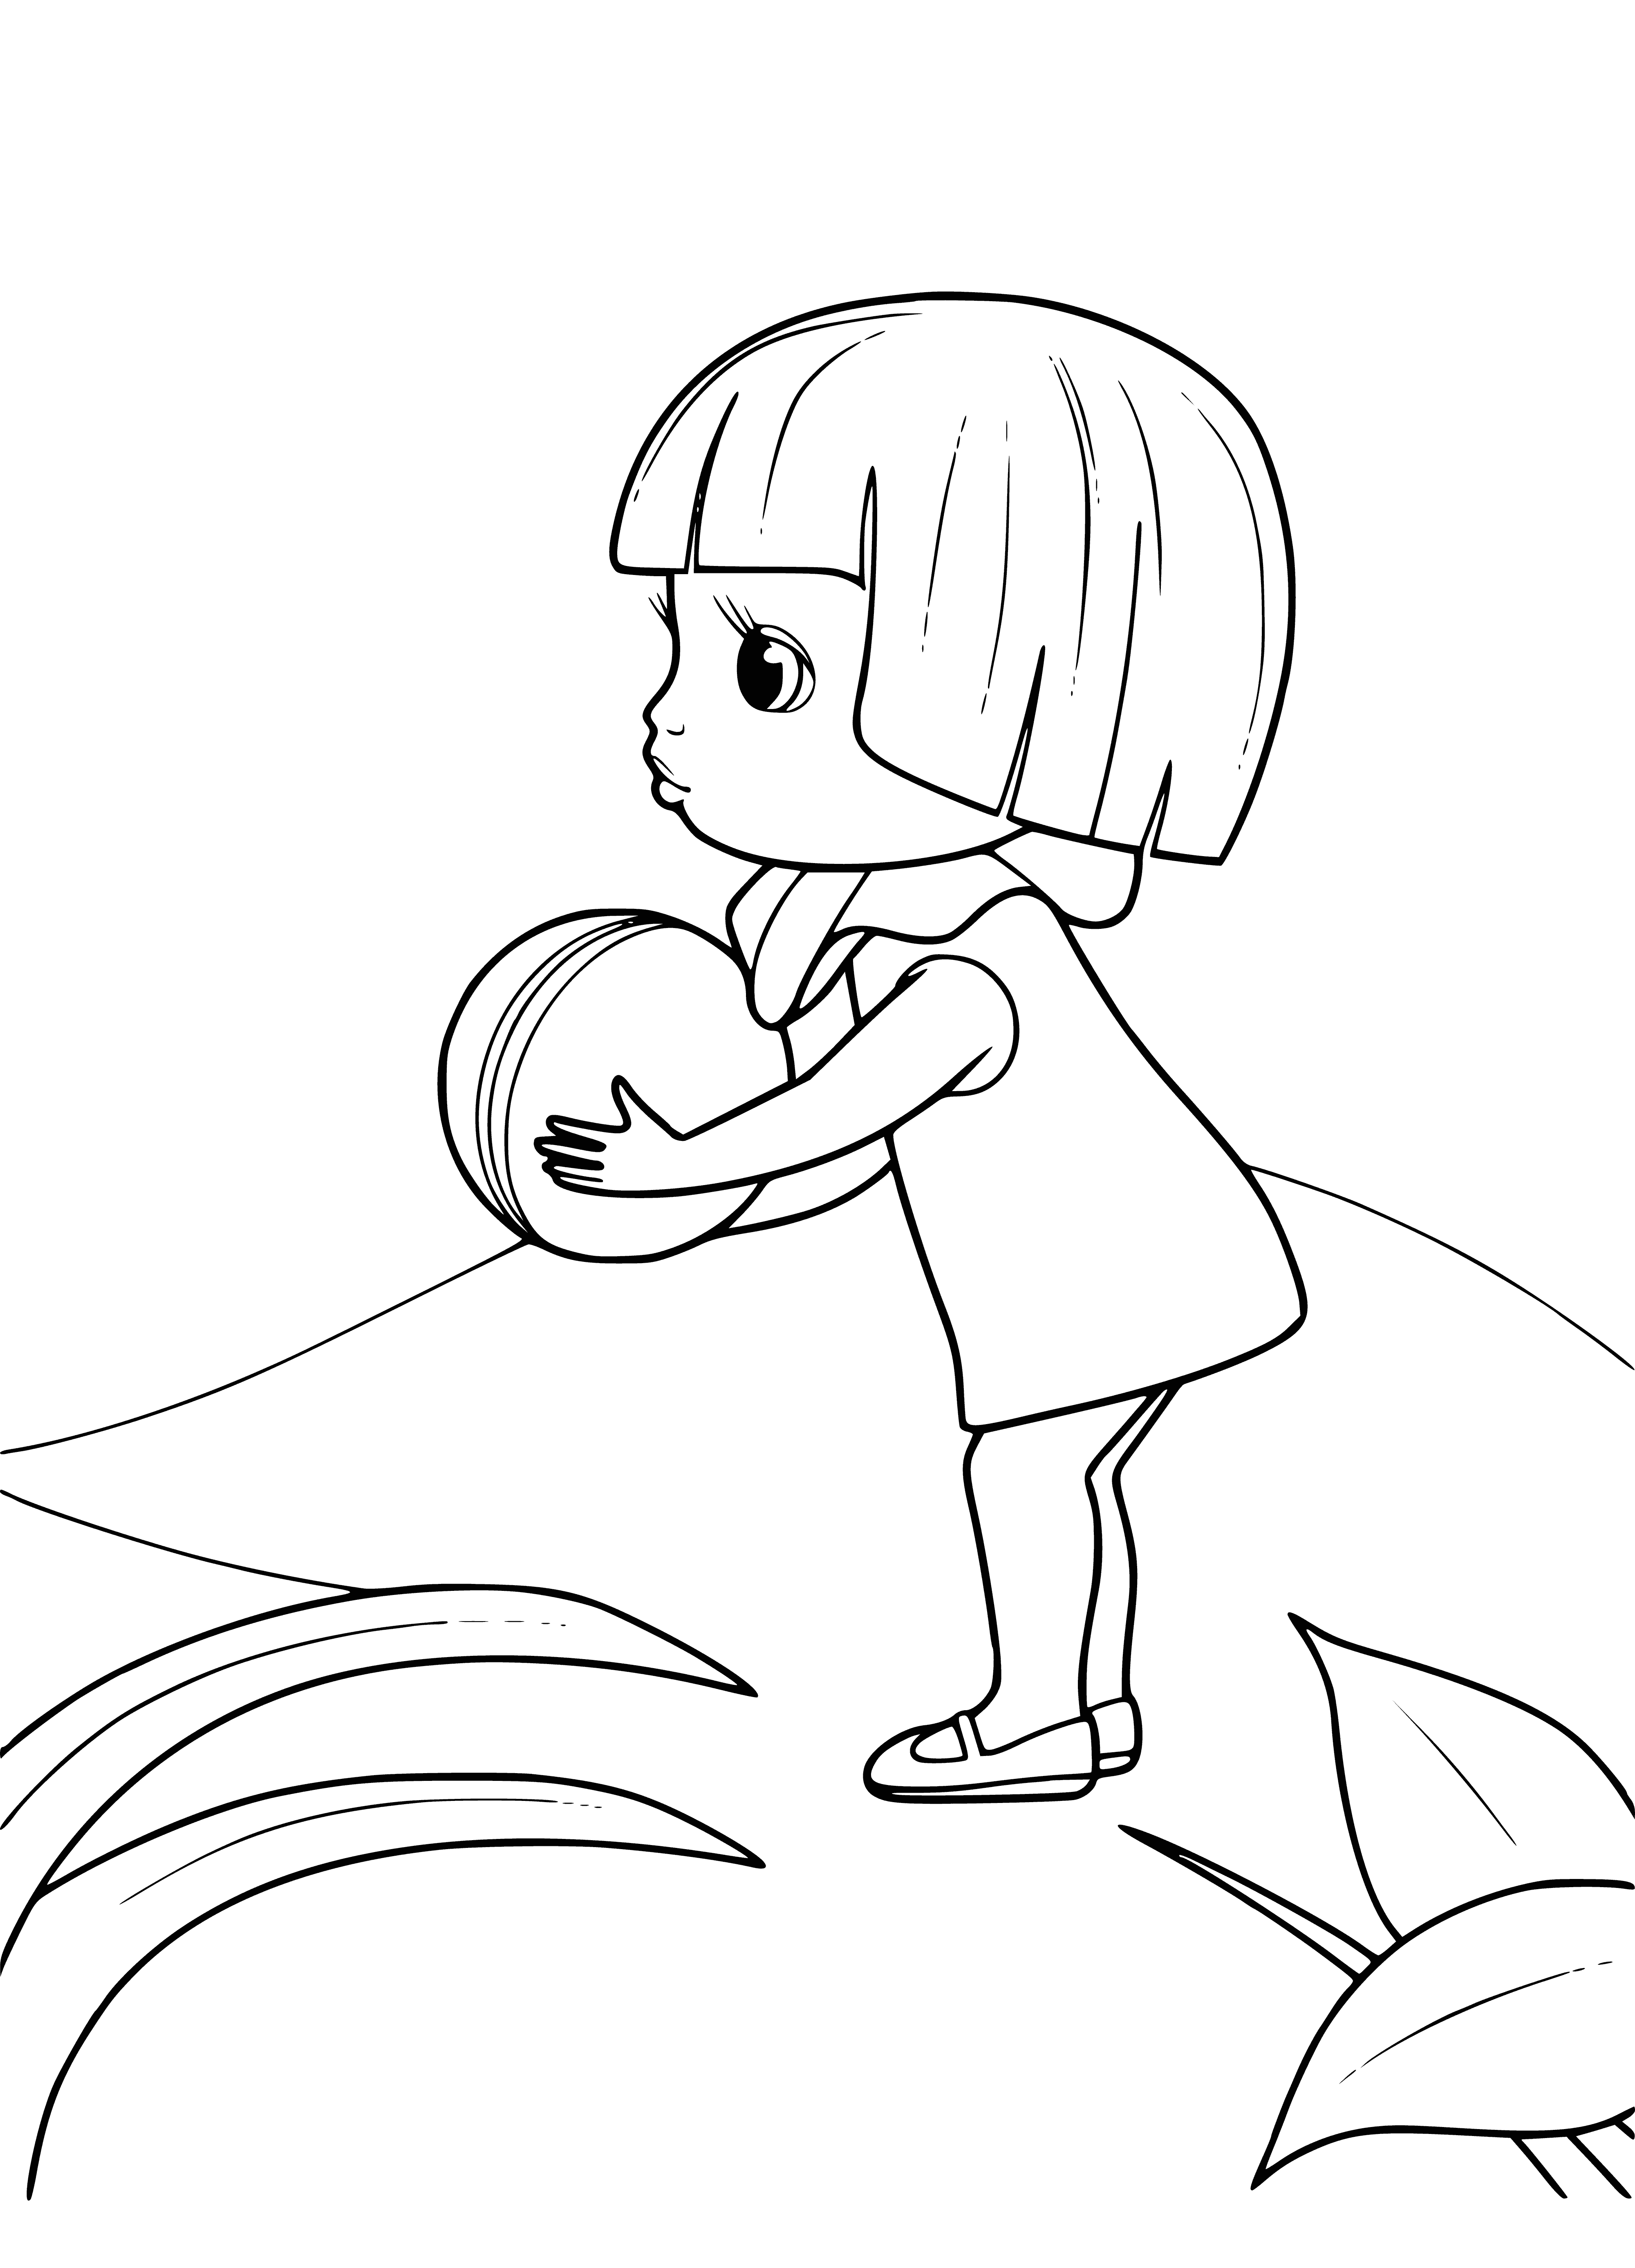 coloring page: Push the green button & you'll get a big, red robot grin!